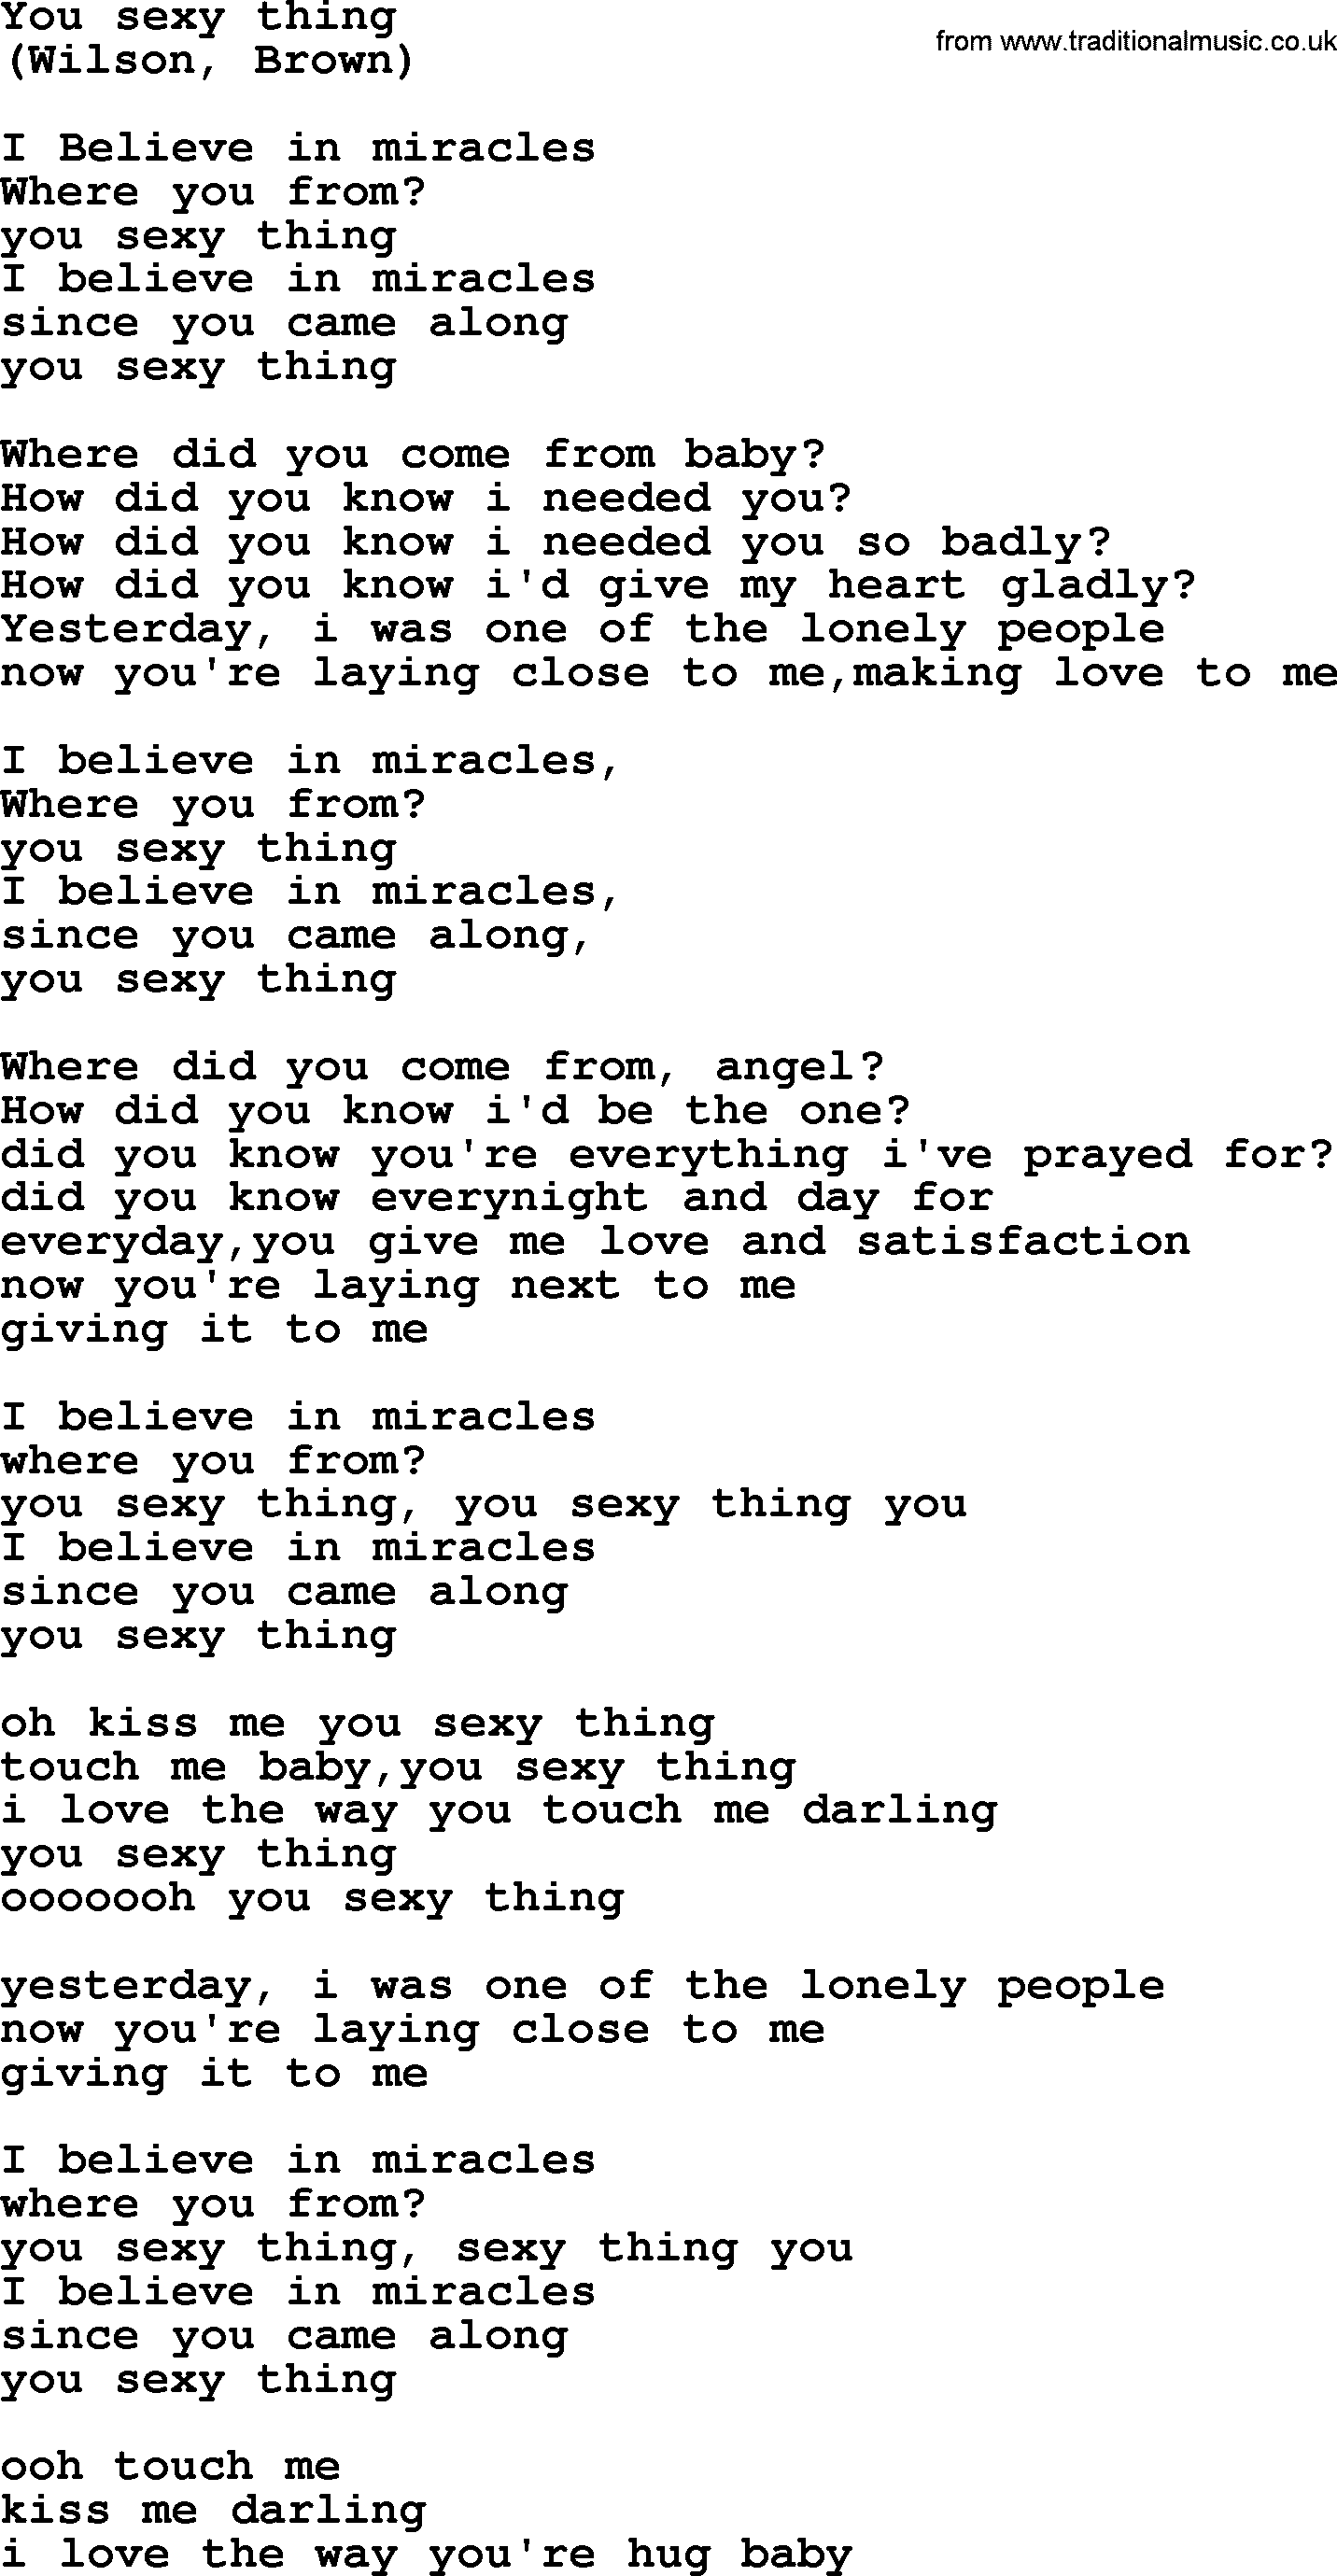 Bruce Springsteen song: You Sexy Thing lyrics